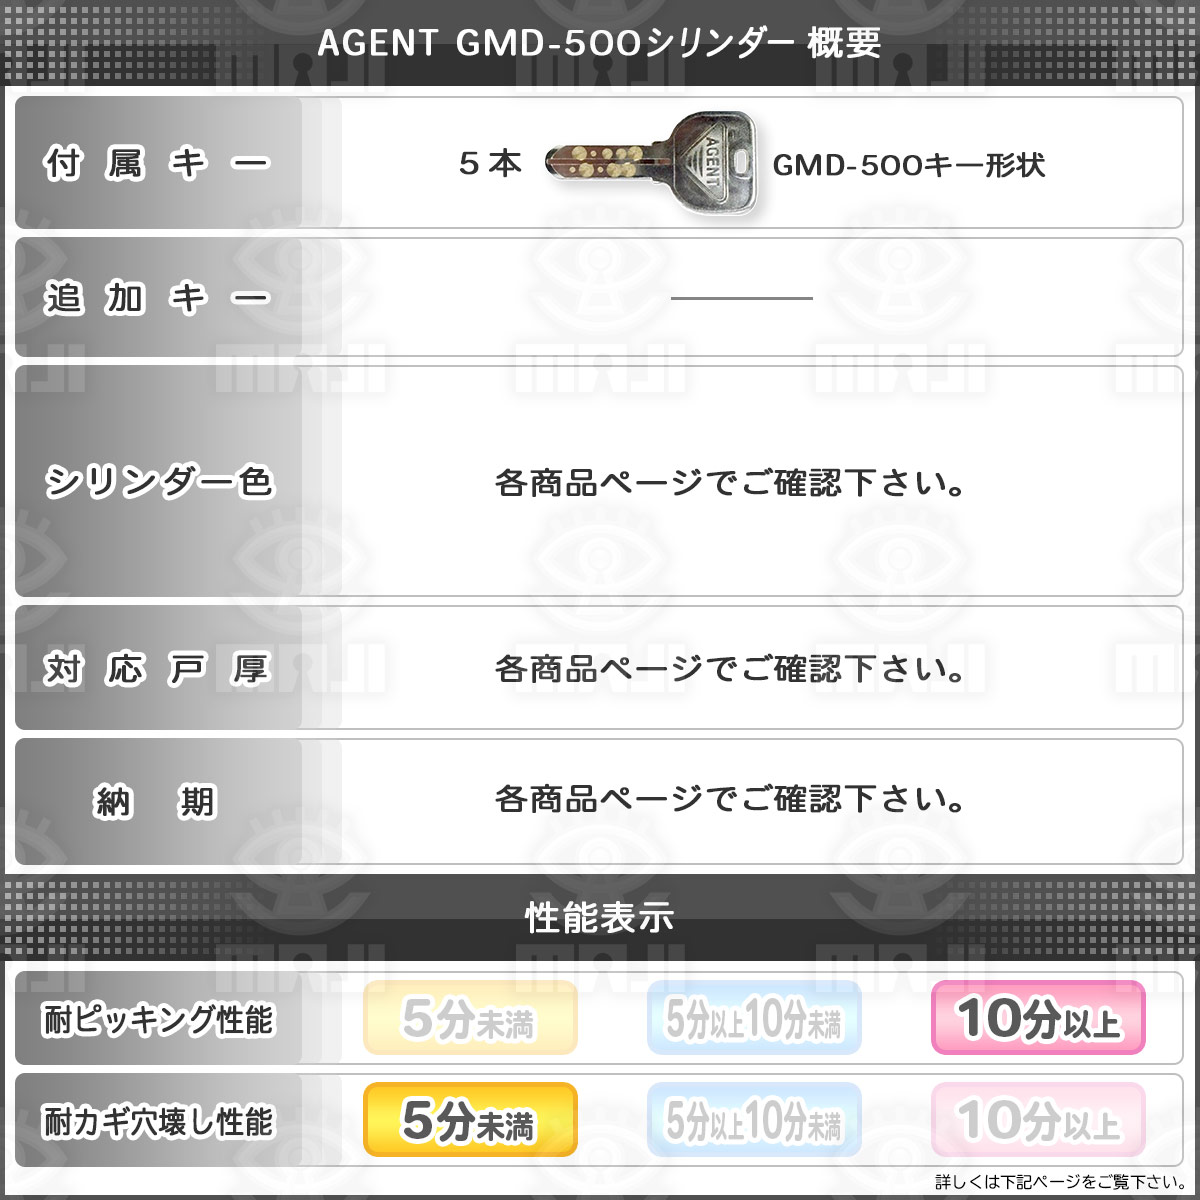 ＡＧＥＮＴ,エージェント ＧＭＤ500